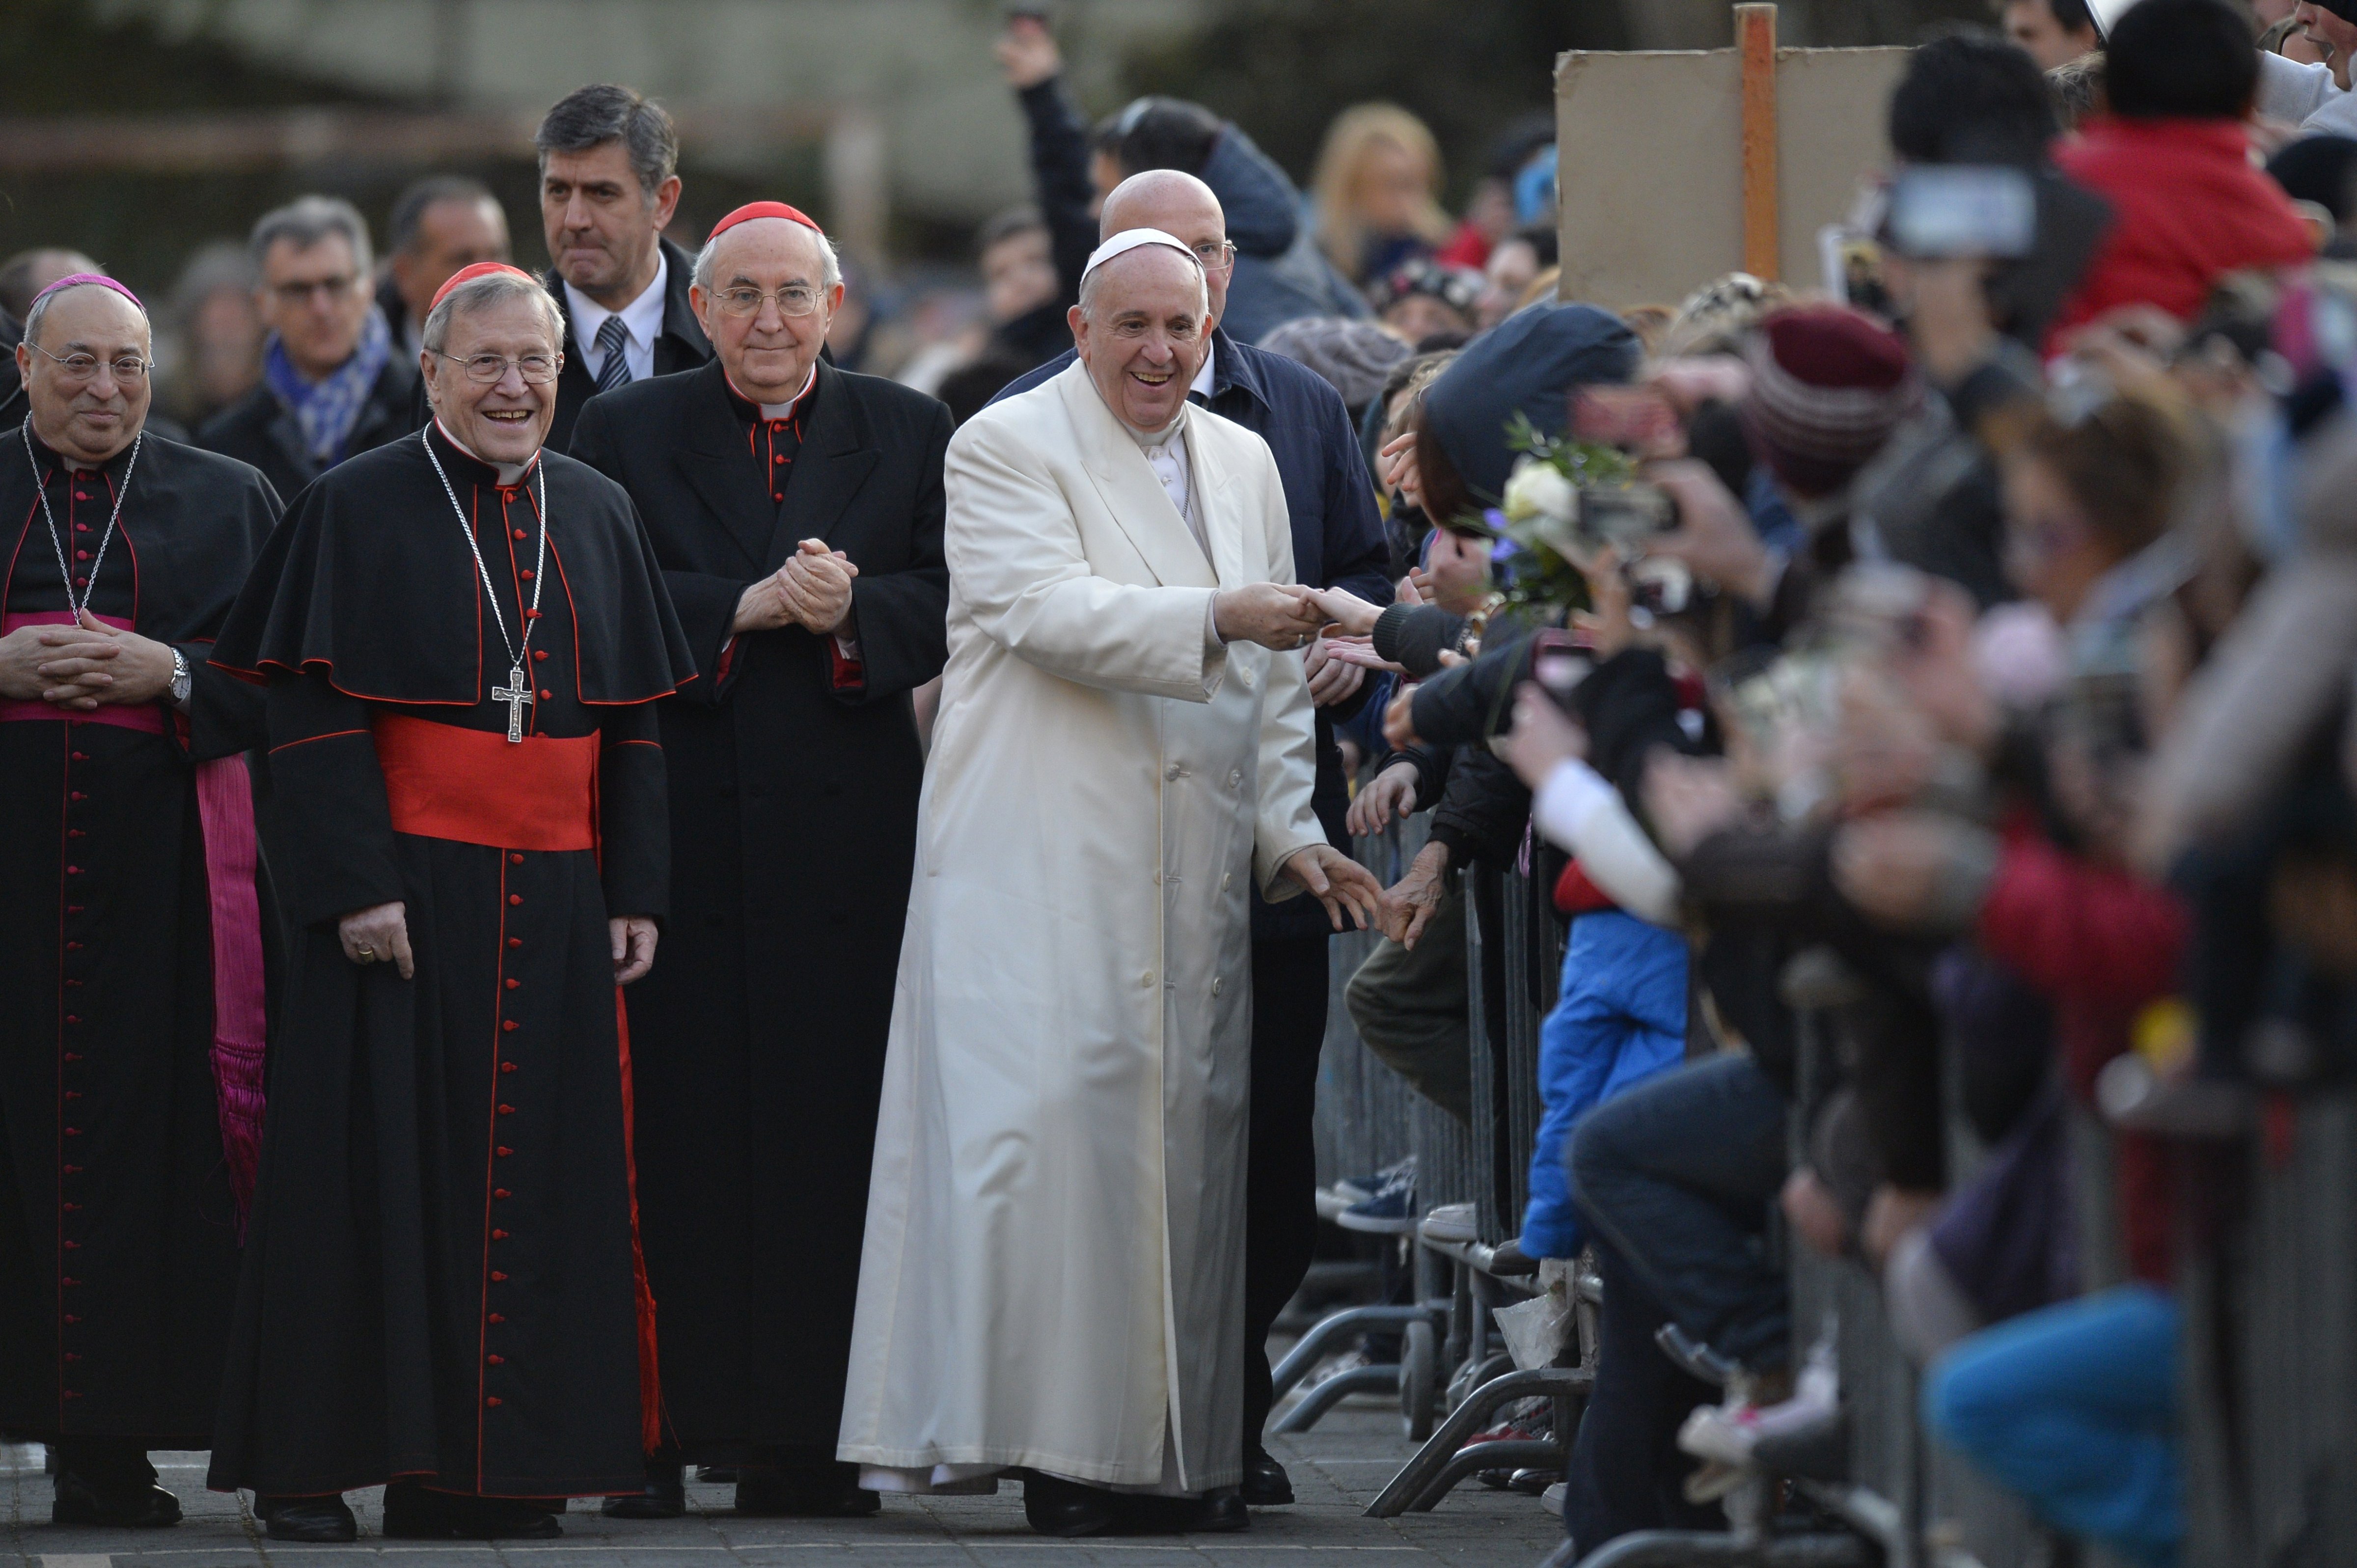 Pope Francis (C) greets the crowd as he arrives for a visit to the Roman Parish of "Ognissanti" on March 7, 2015 in Rome. (ANDREAS SOLARO—AFP/Getty Images)